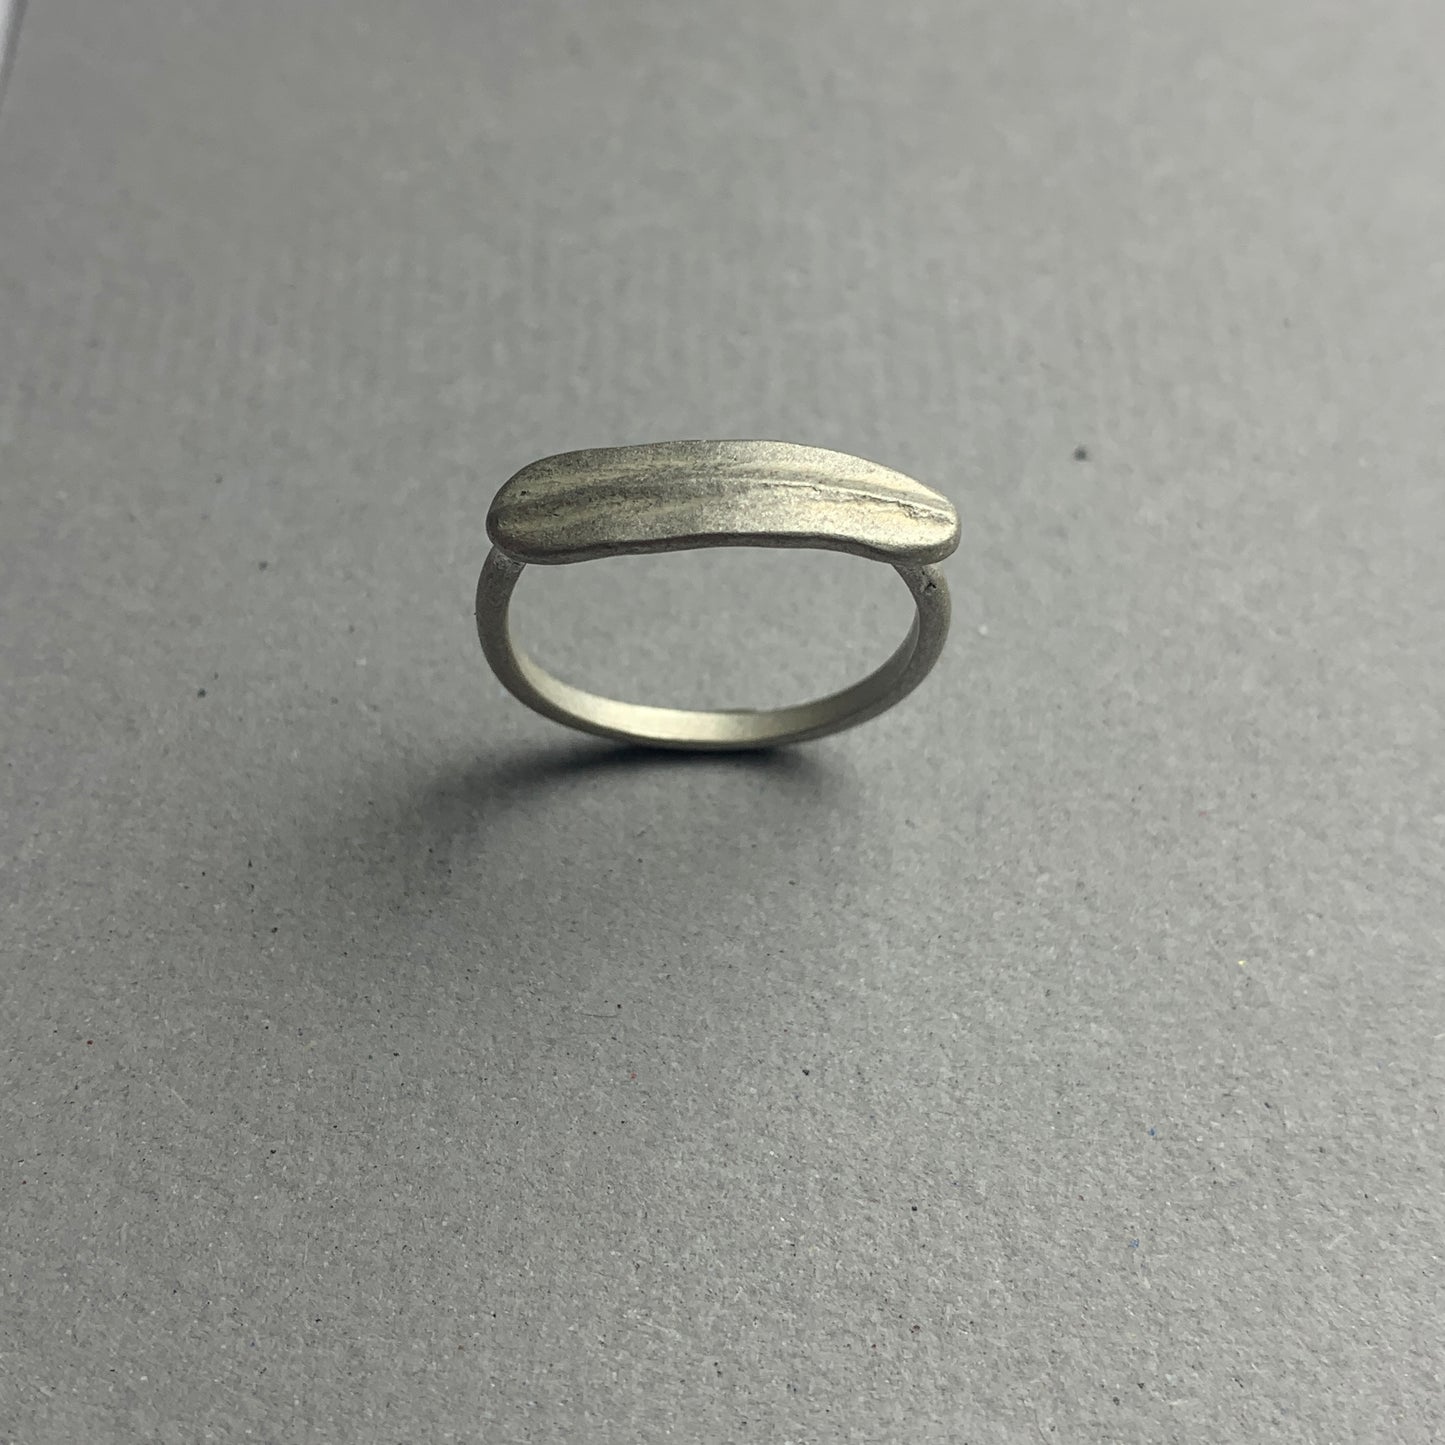 Journal Ring-Leaf No.4 -Silver